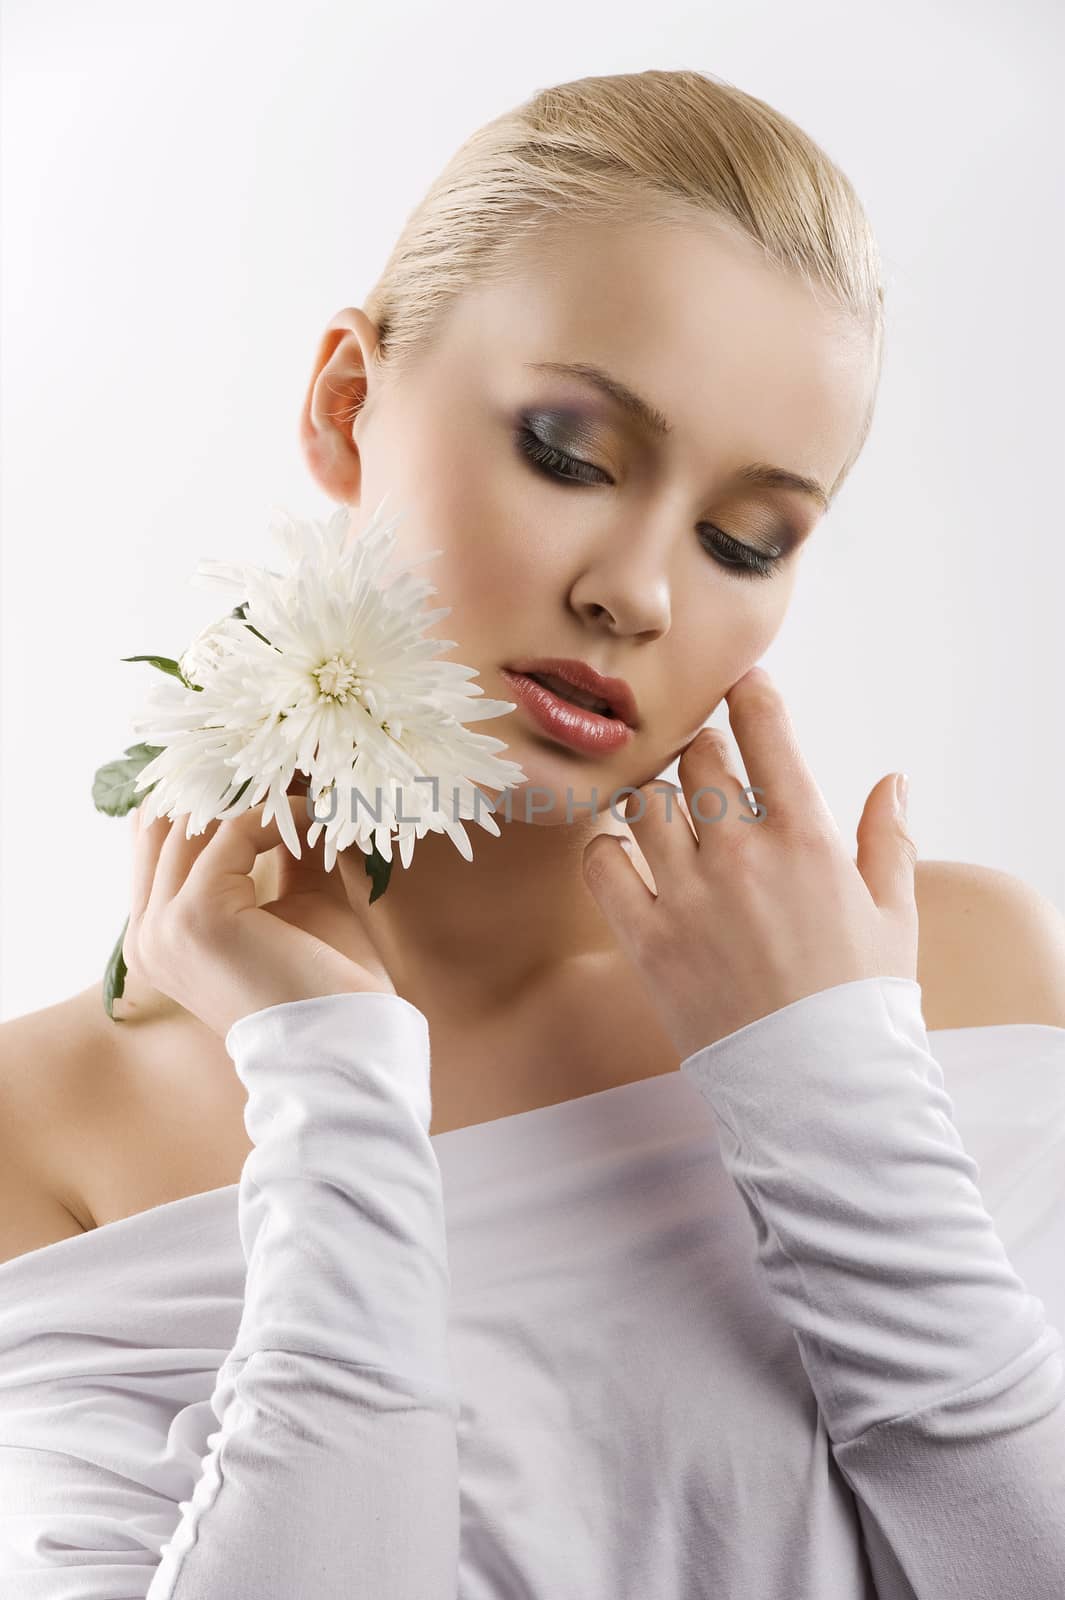 beauty portrait of young cute blond girl with white top and some flowers near face